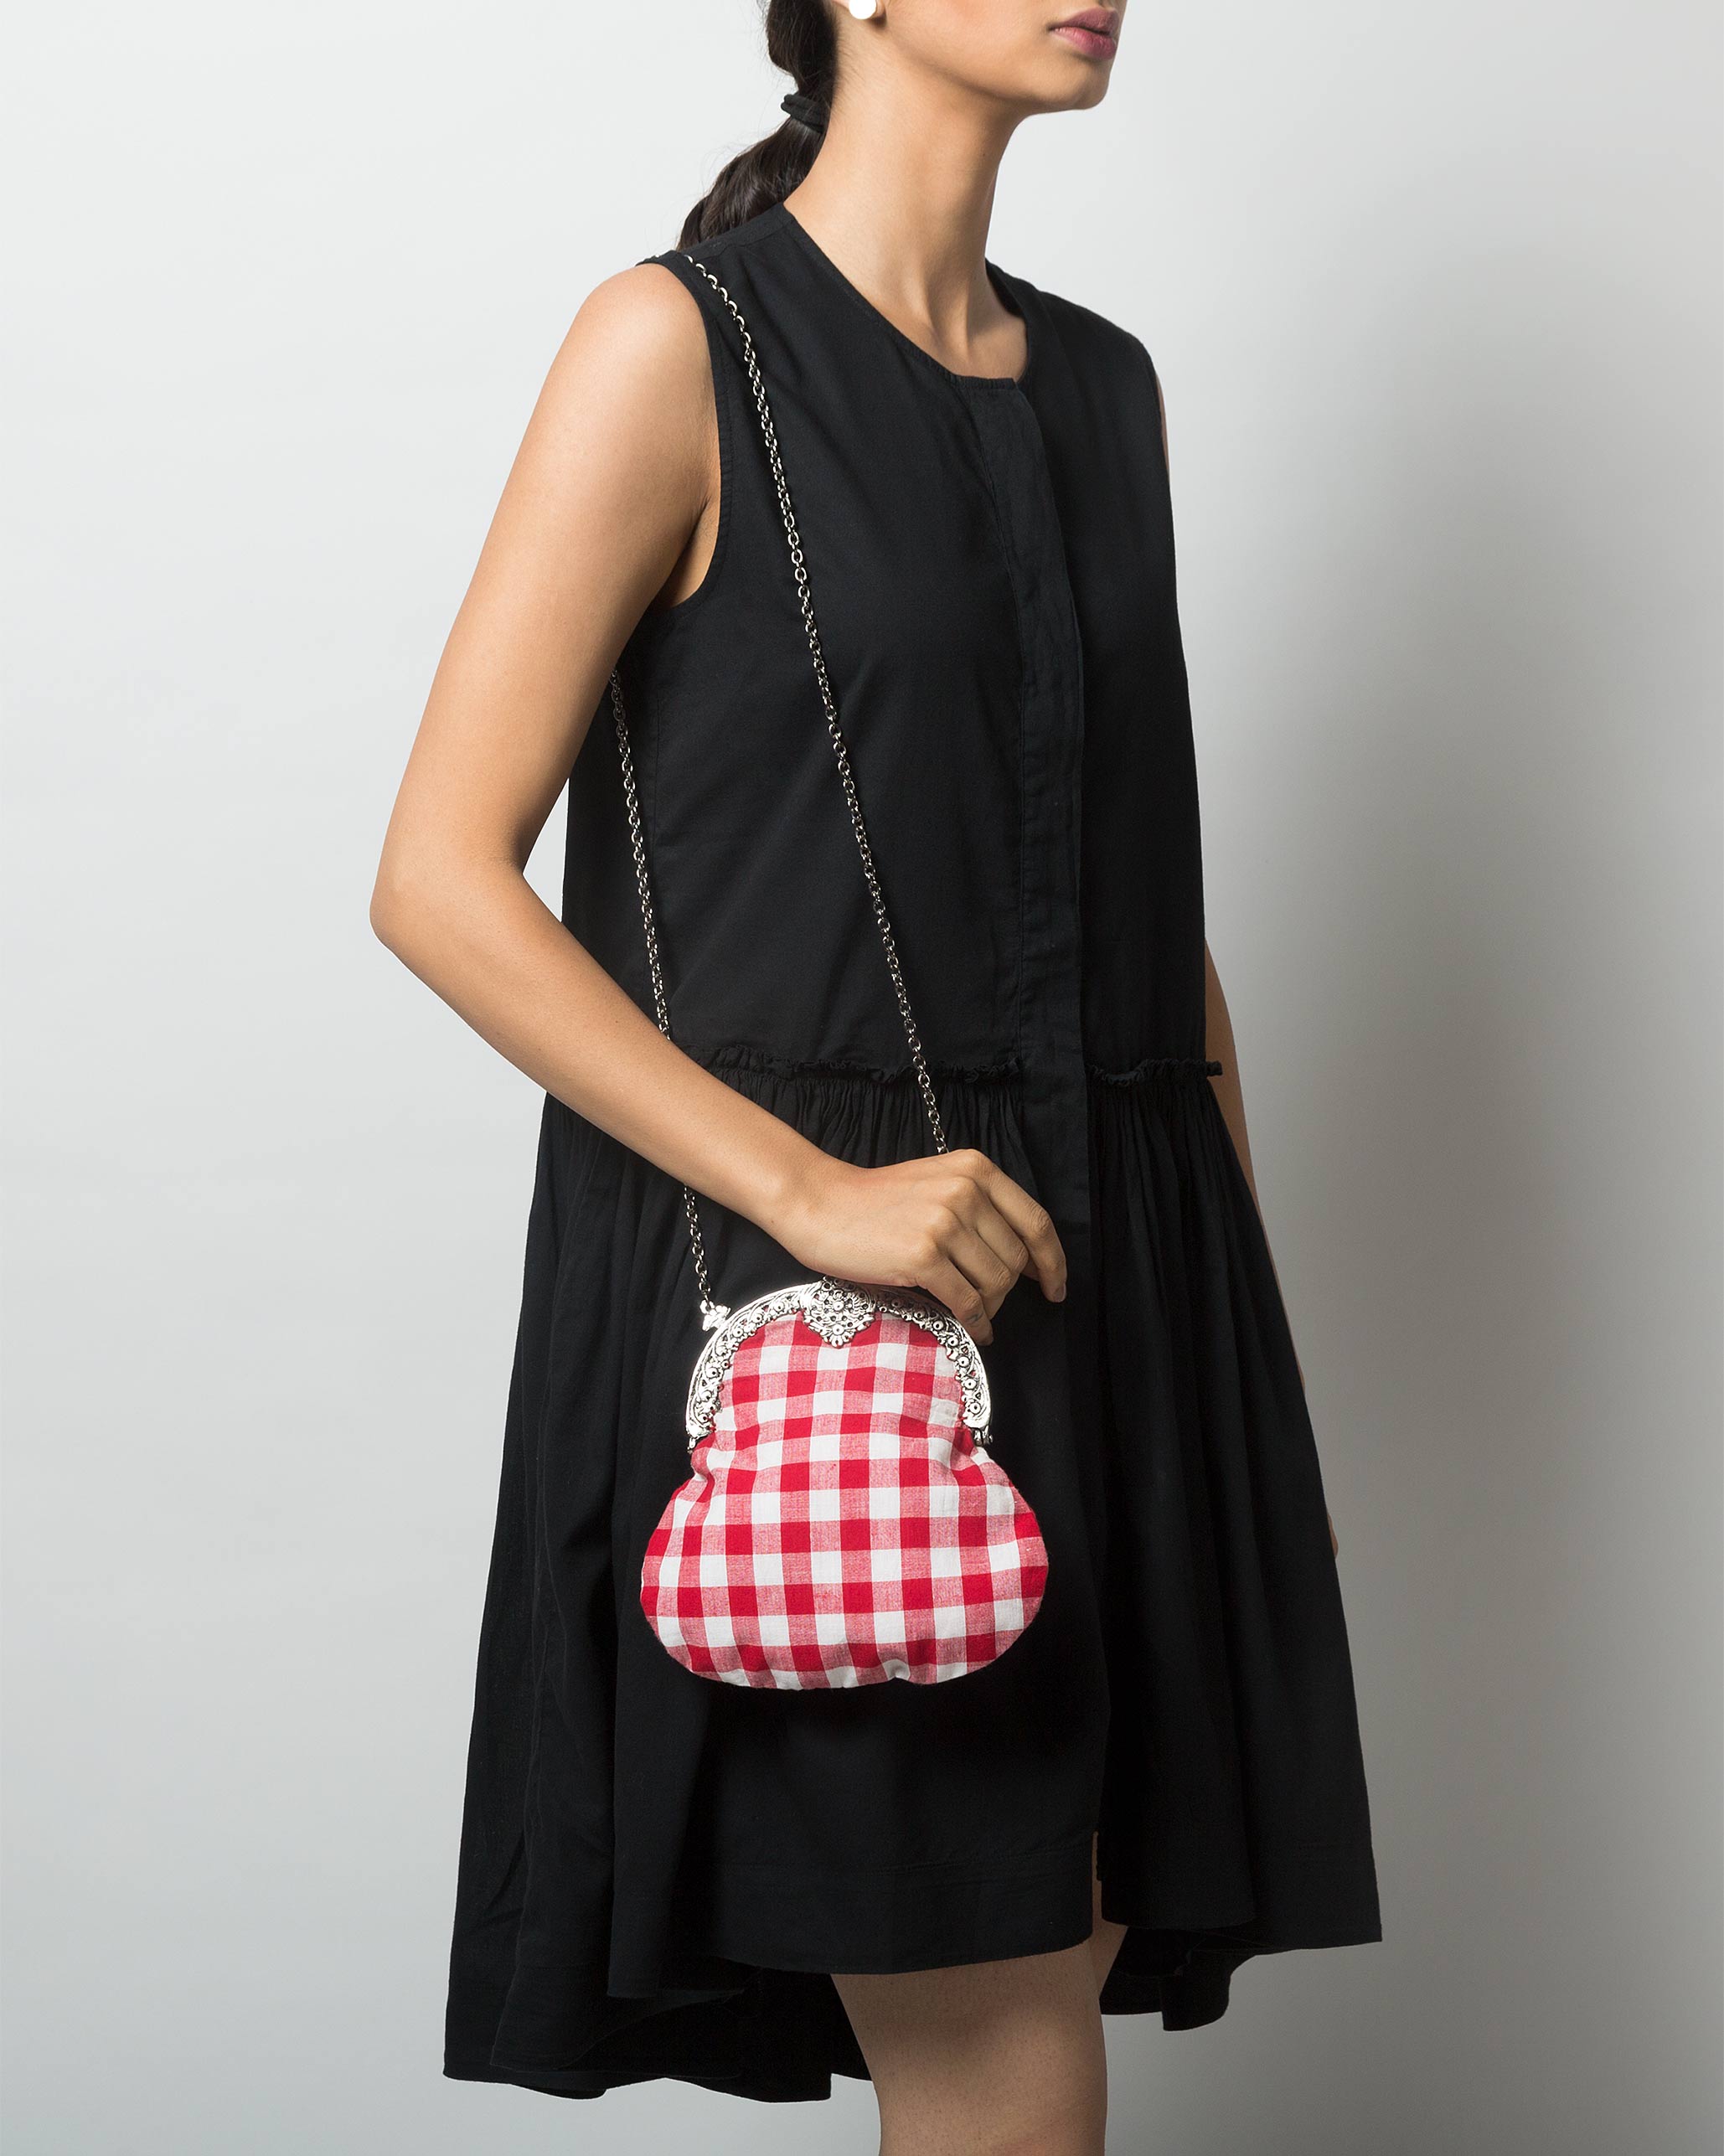 Gingham Red Clutch